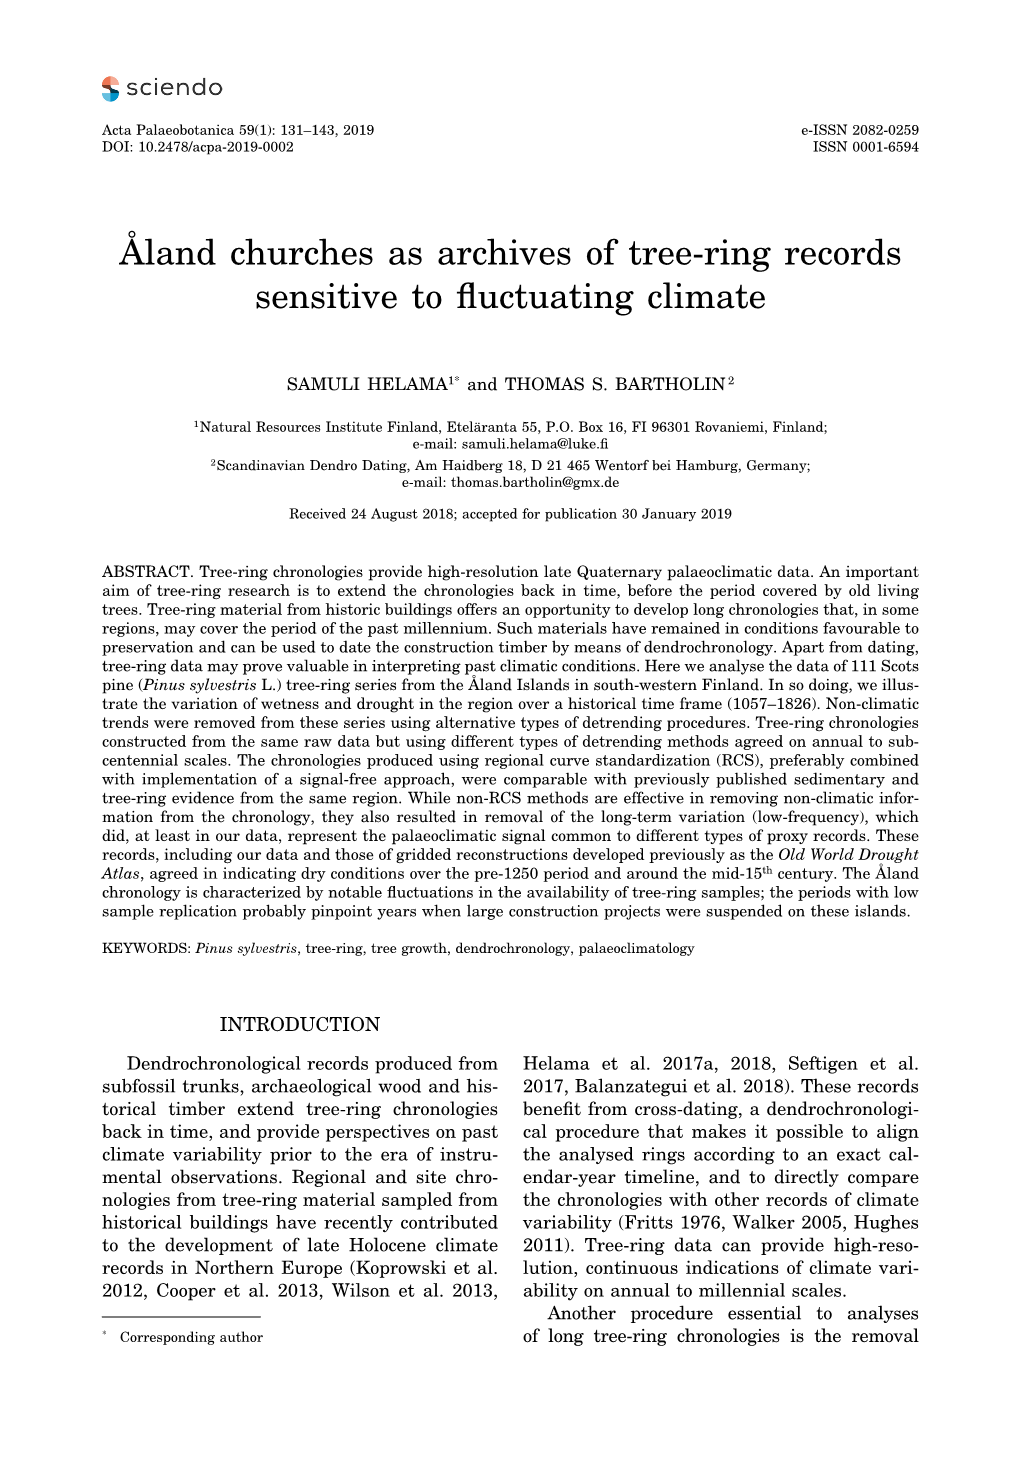 Åland Churches As Archives of Tree-Ring Records Sensitive to Fluctuating Climate